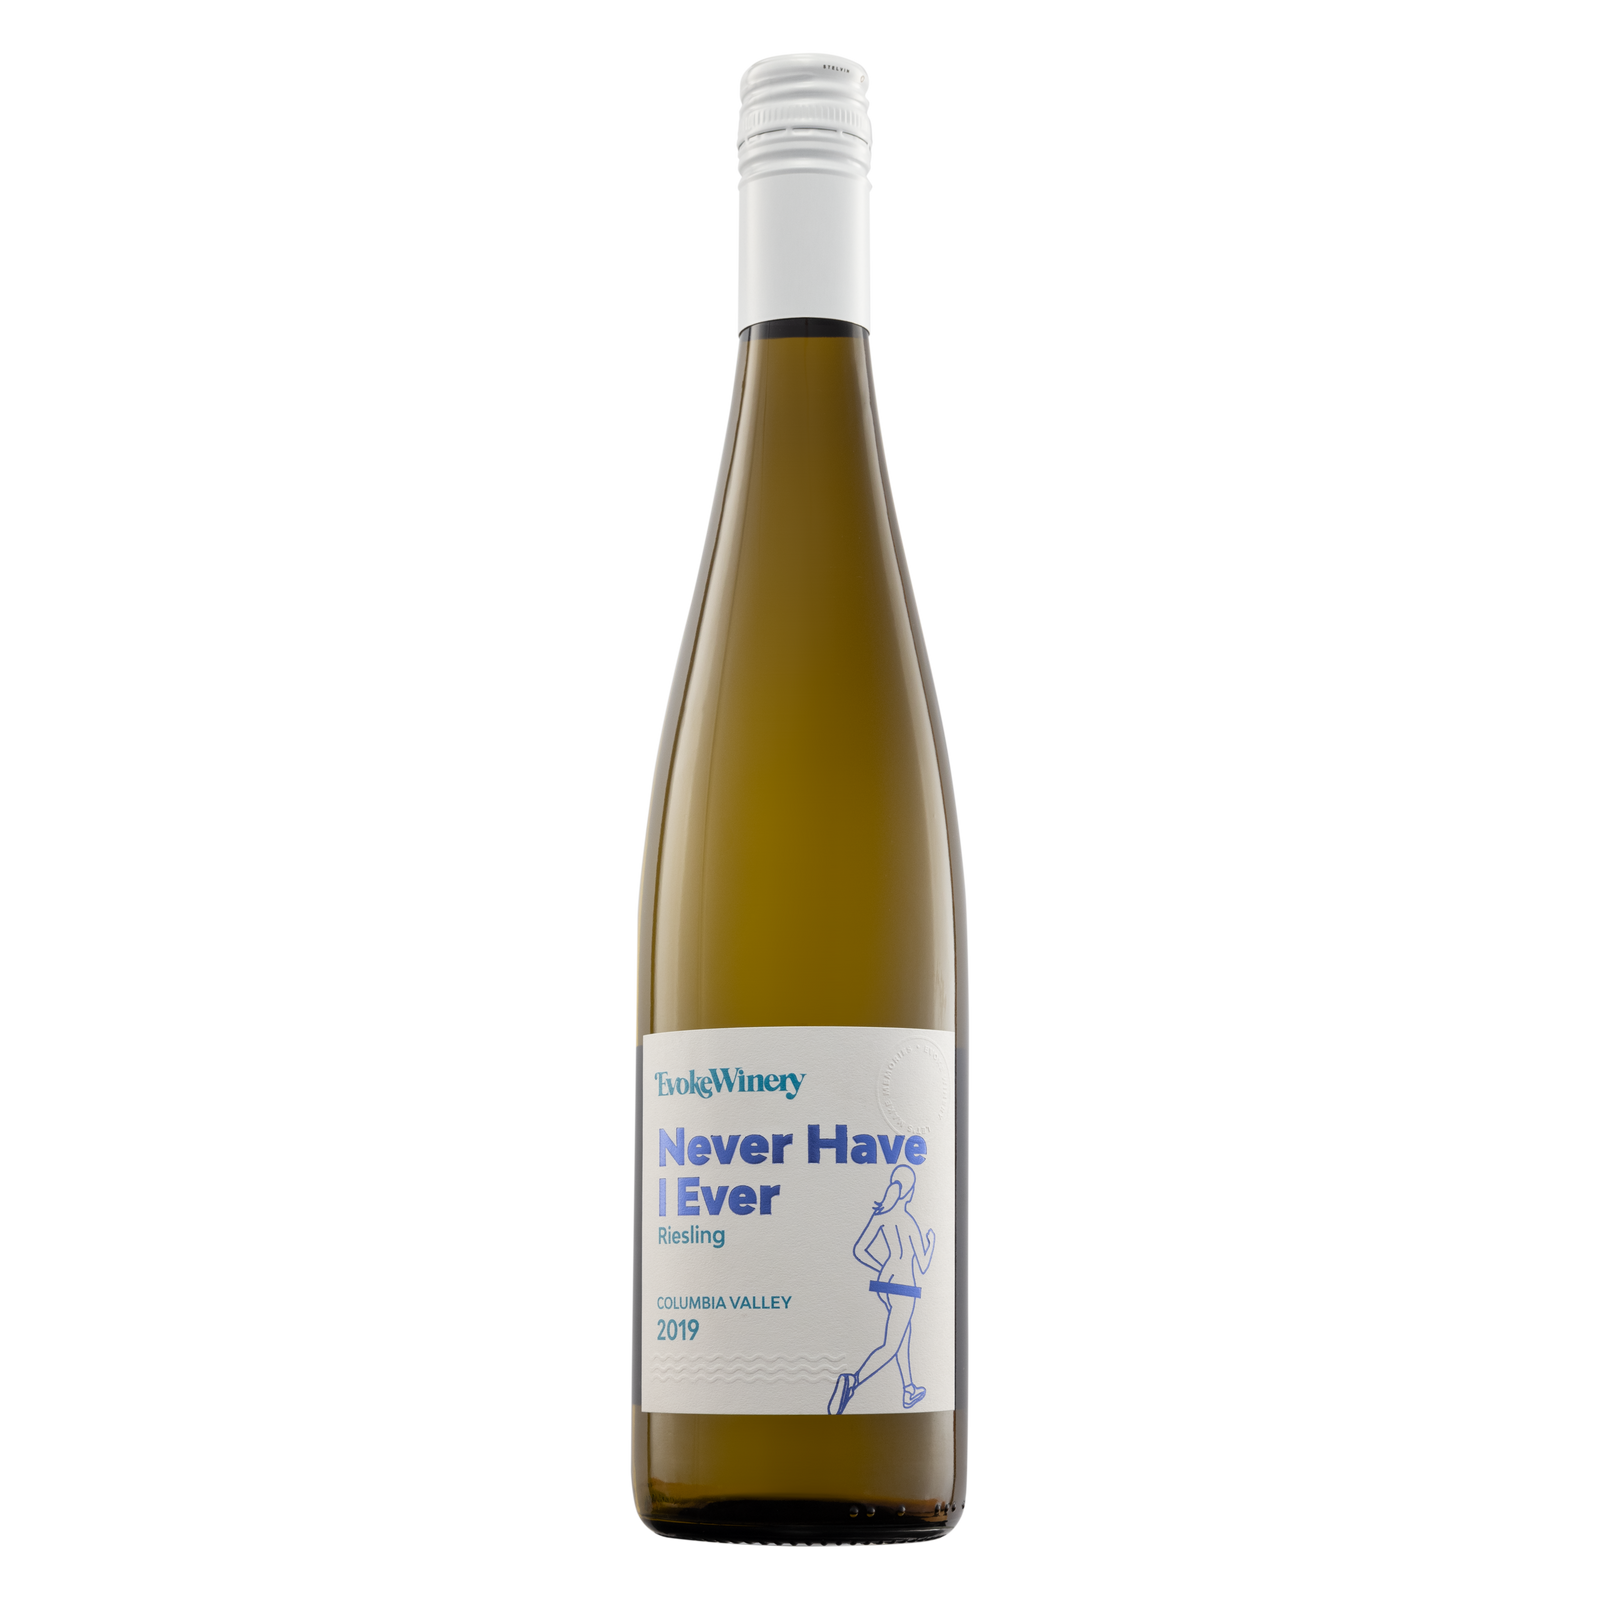 NEVER HAVE I EVER RIESLING - 2019